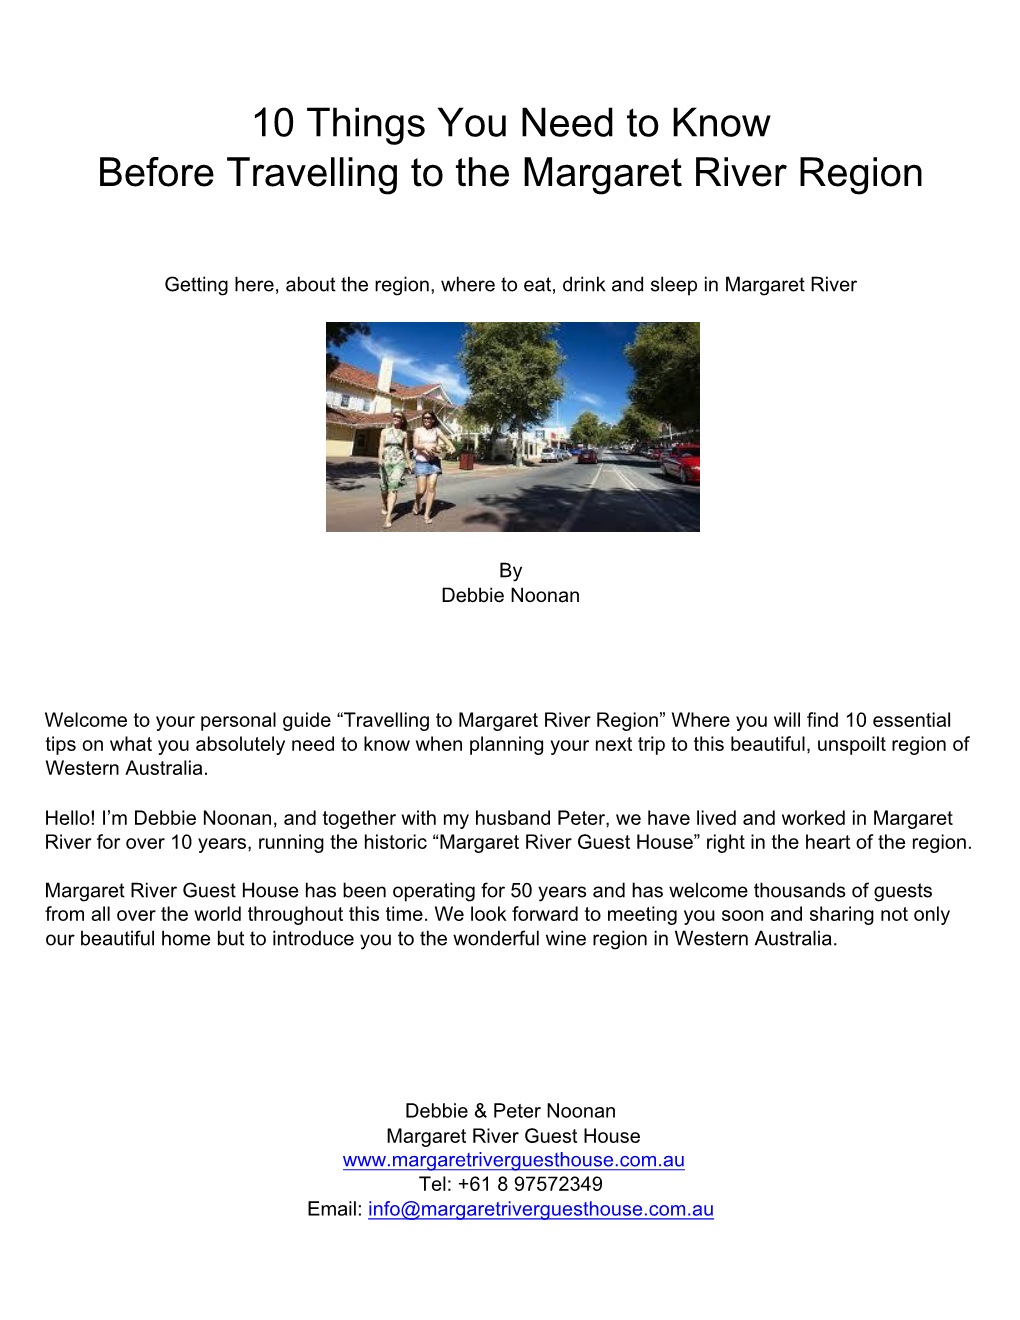 10 Things You Need to Know Before Travelling to the Margaret River